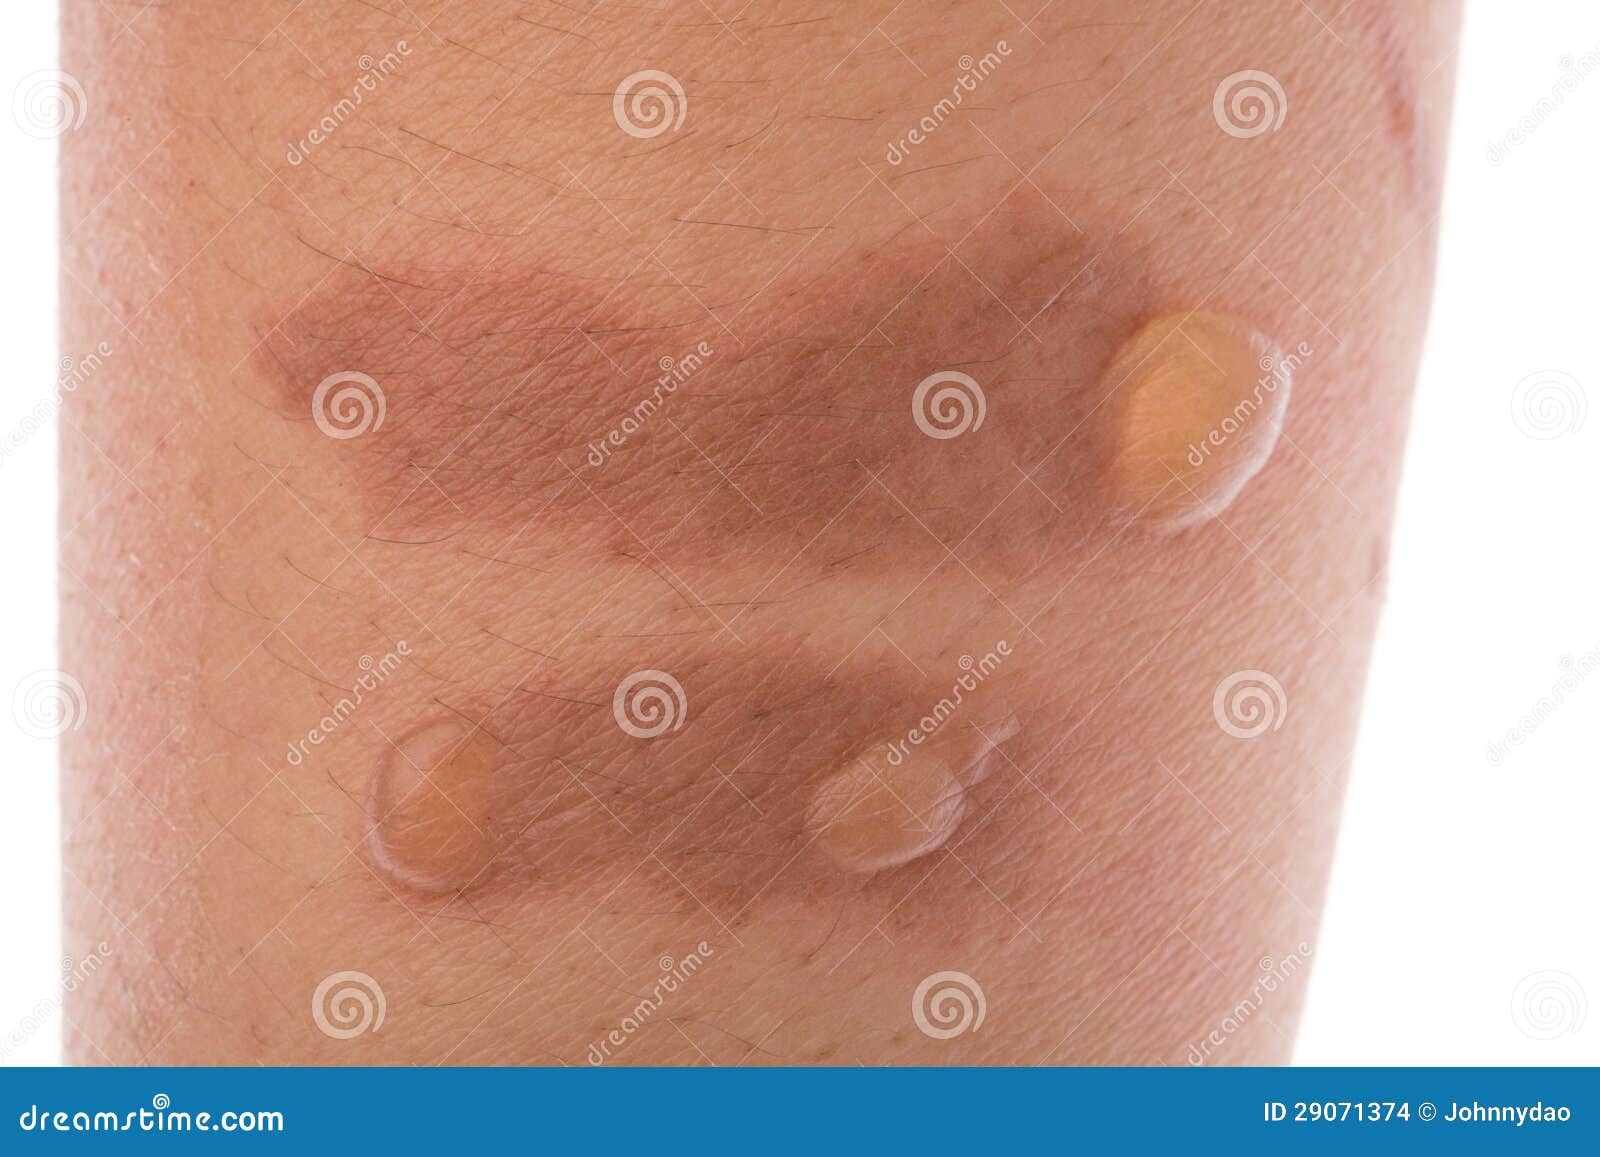 Burn blisters on the skin stock photo. Image of healthcare ...